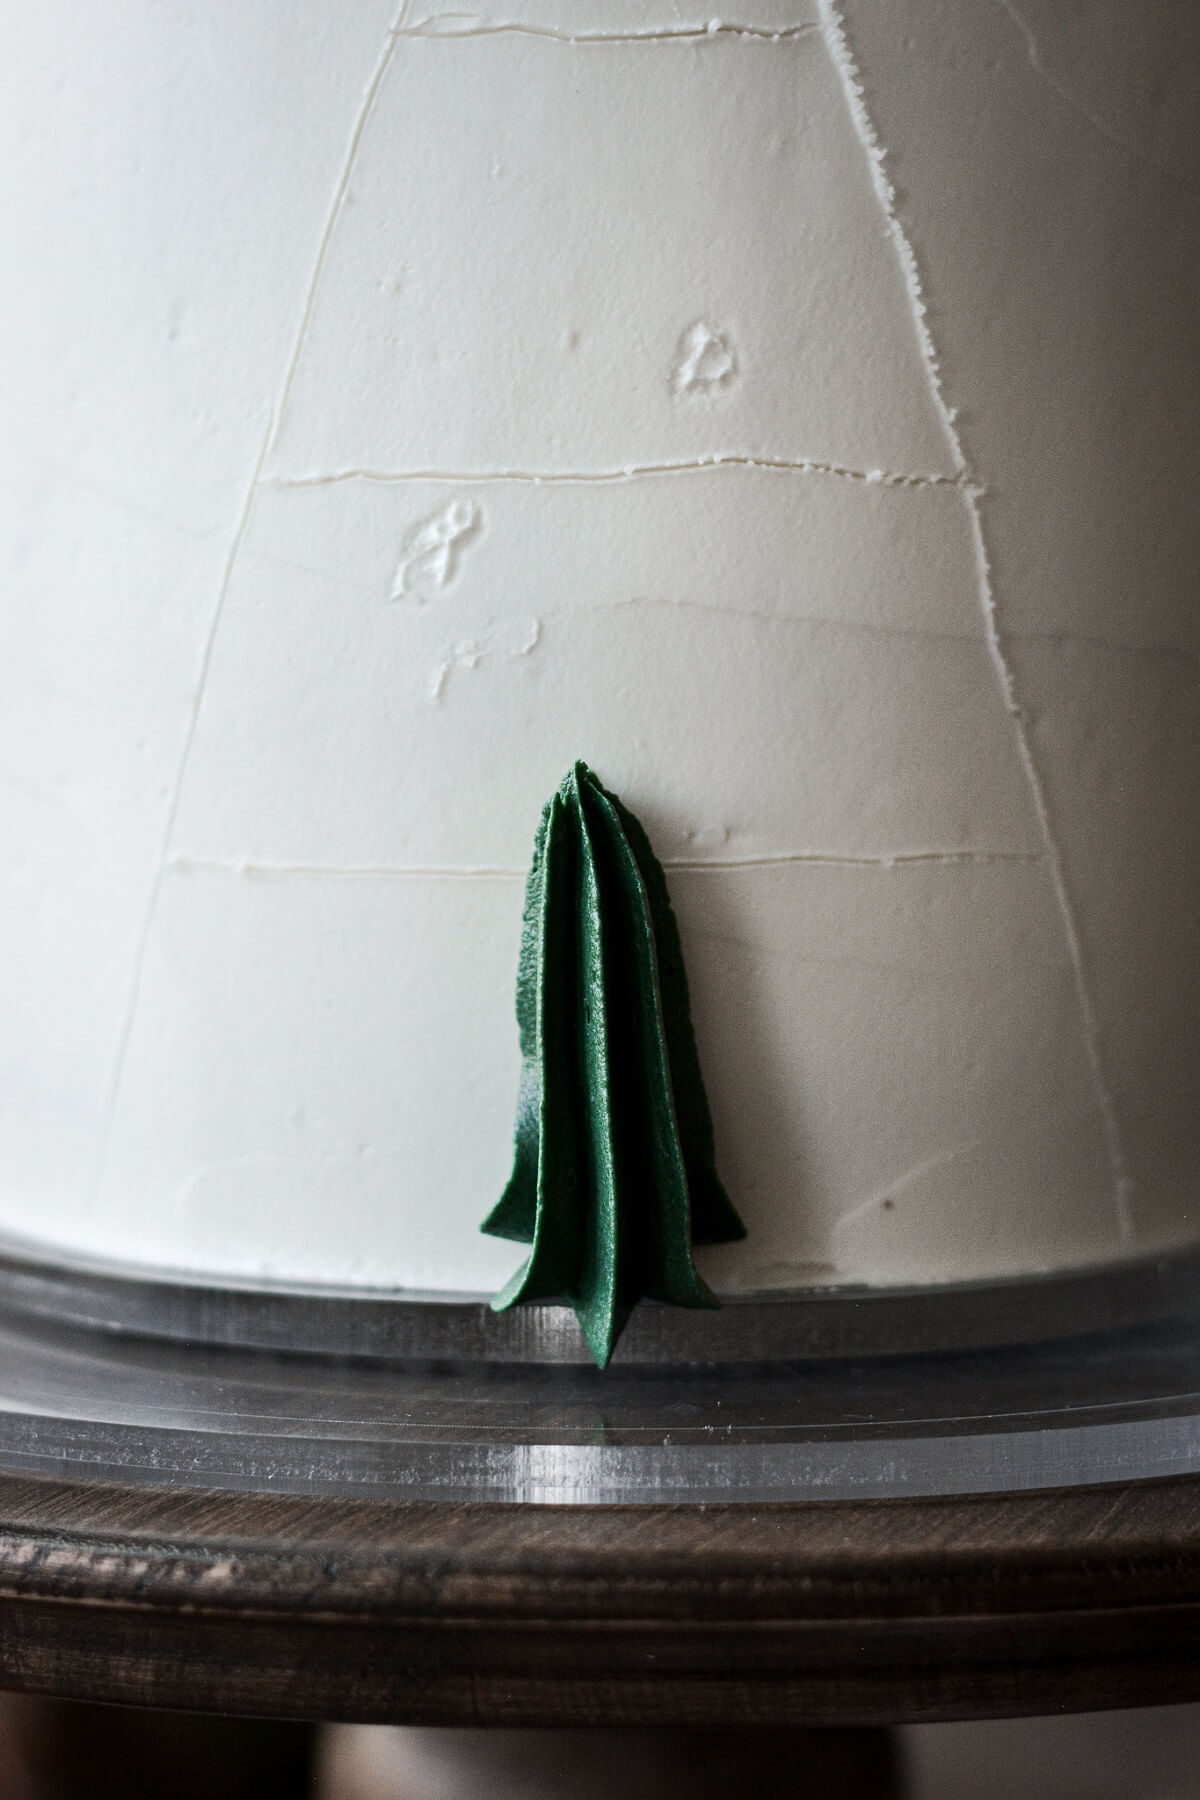 Step 3 for decorating a buttercream Christmas tree cake.